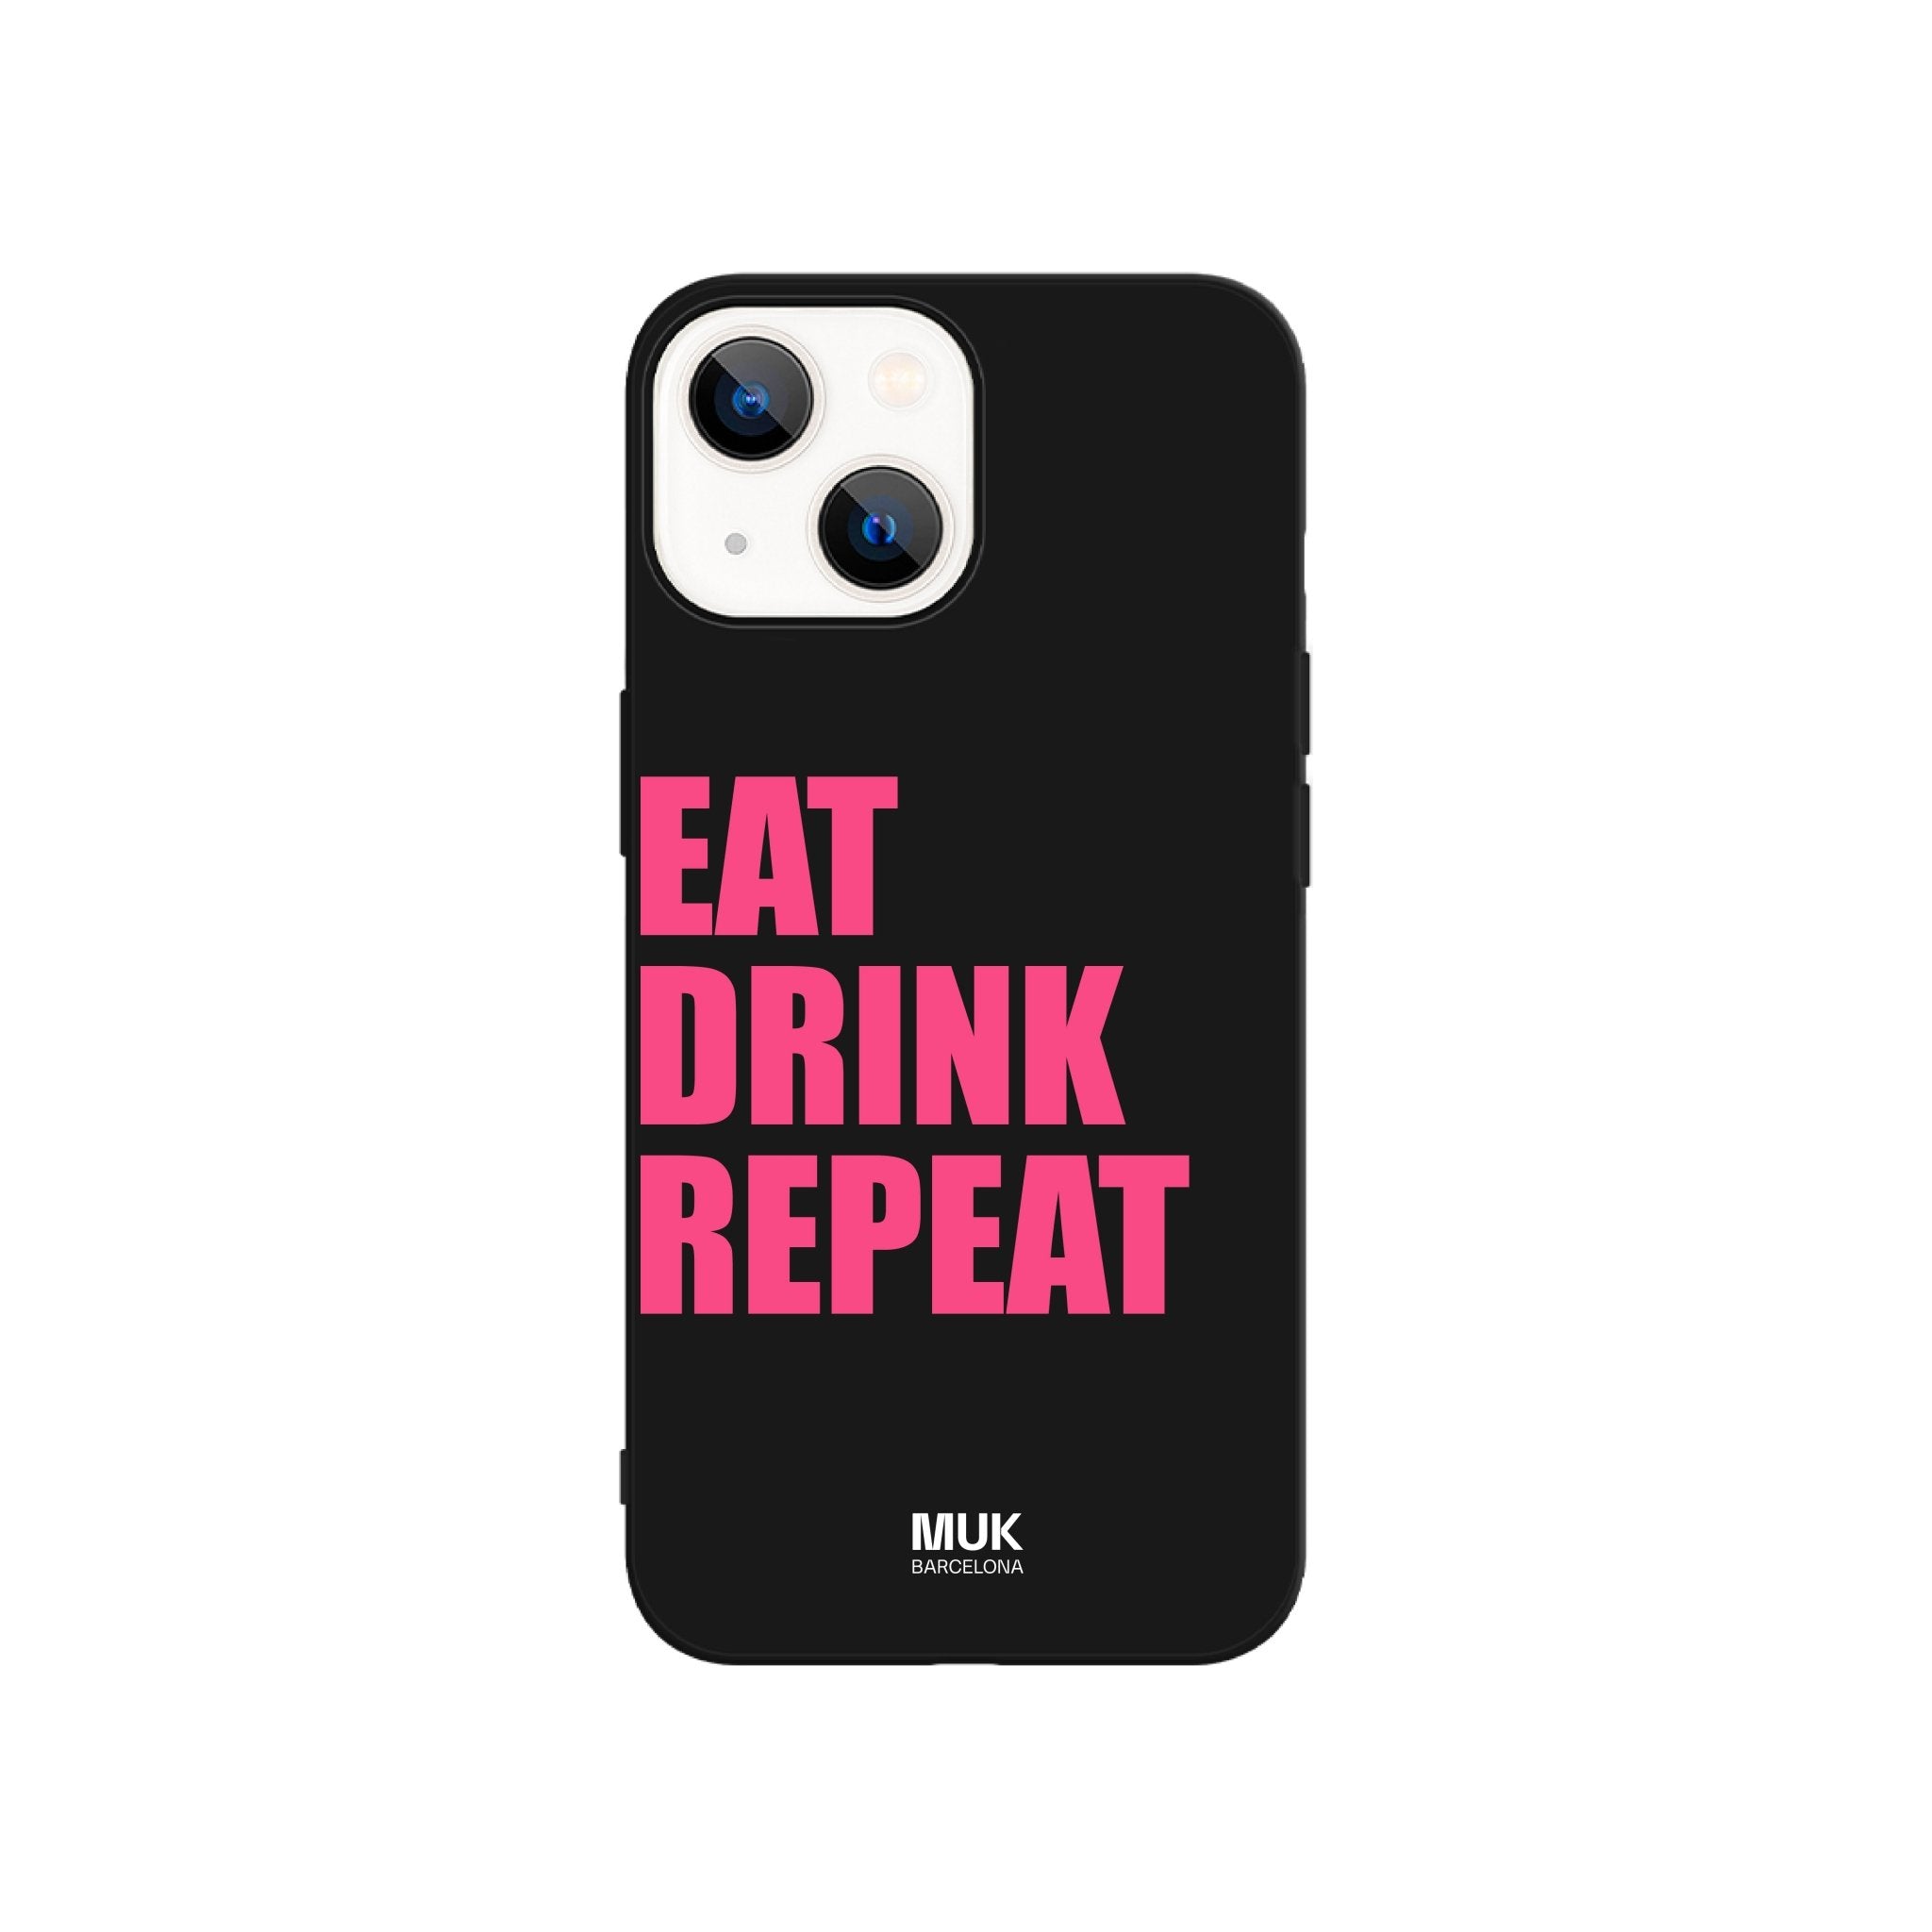 Black Phone case with customizable text.
